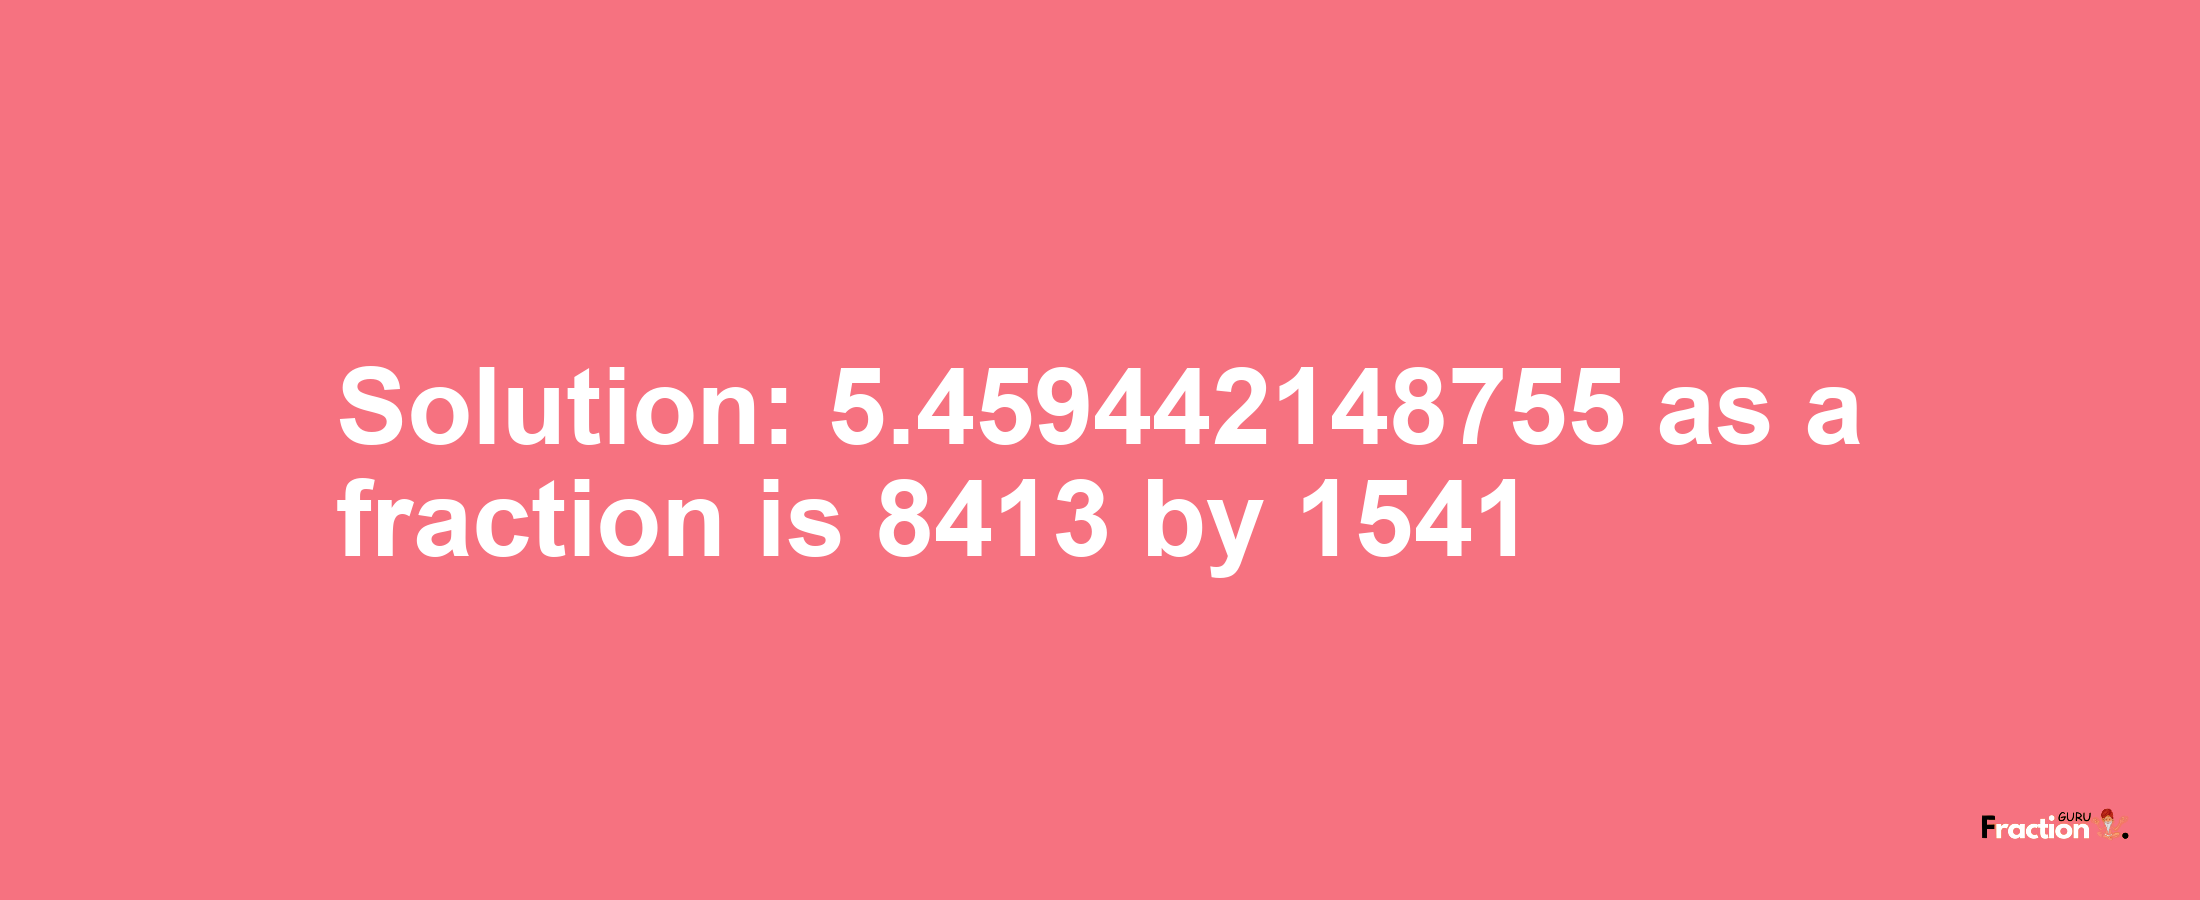 Solution:5.459442148755 as a fraction is 8413/1541